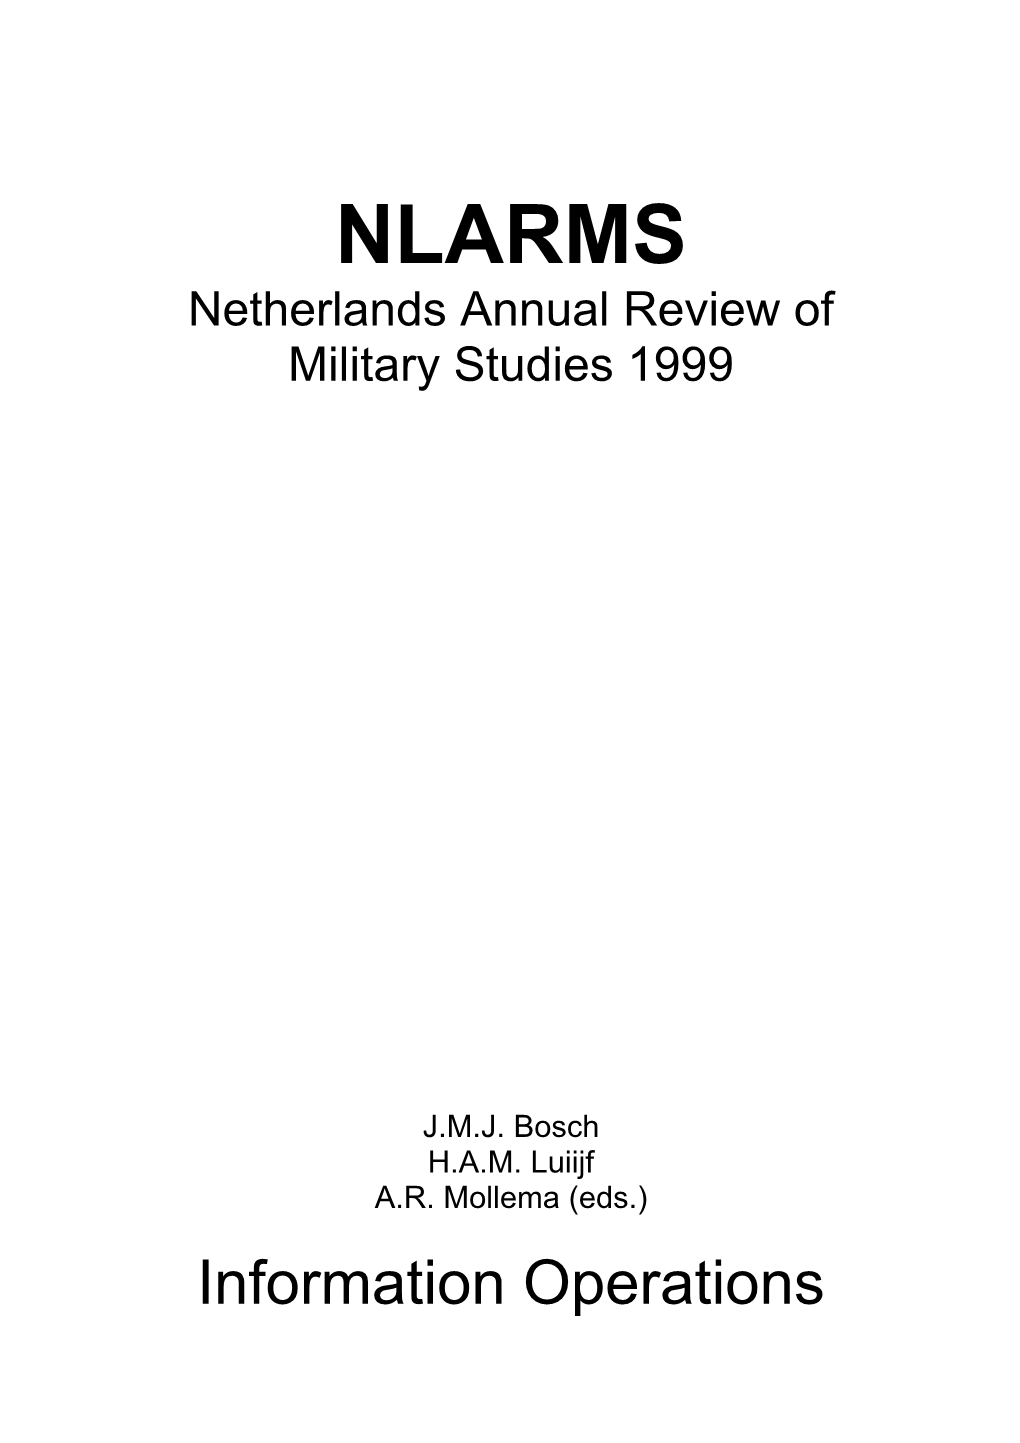 NLARMS Netherlands Annual Review of Military Studies 1999